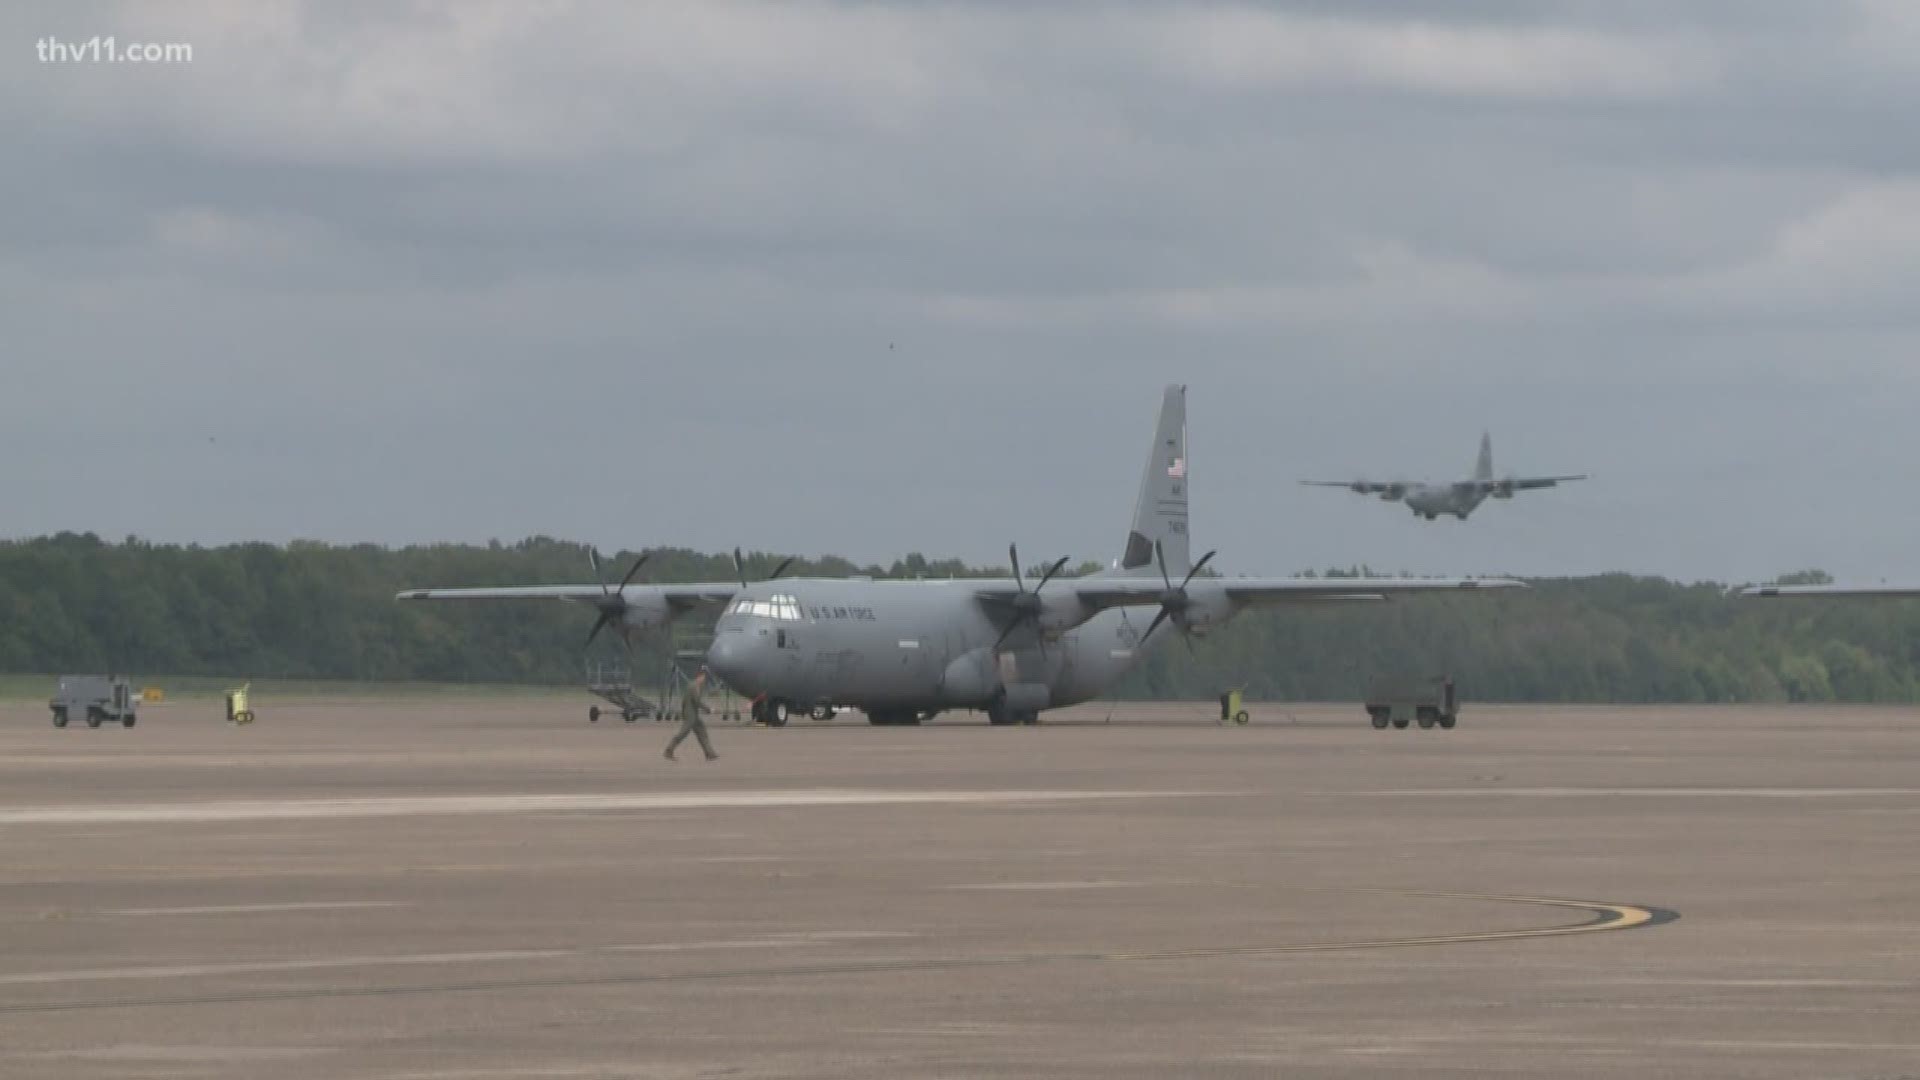 22 warplanes and cargo planes arrived at LRAFB this afternoon, along with 200 airmen.